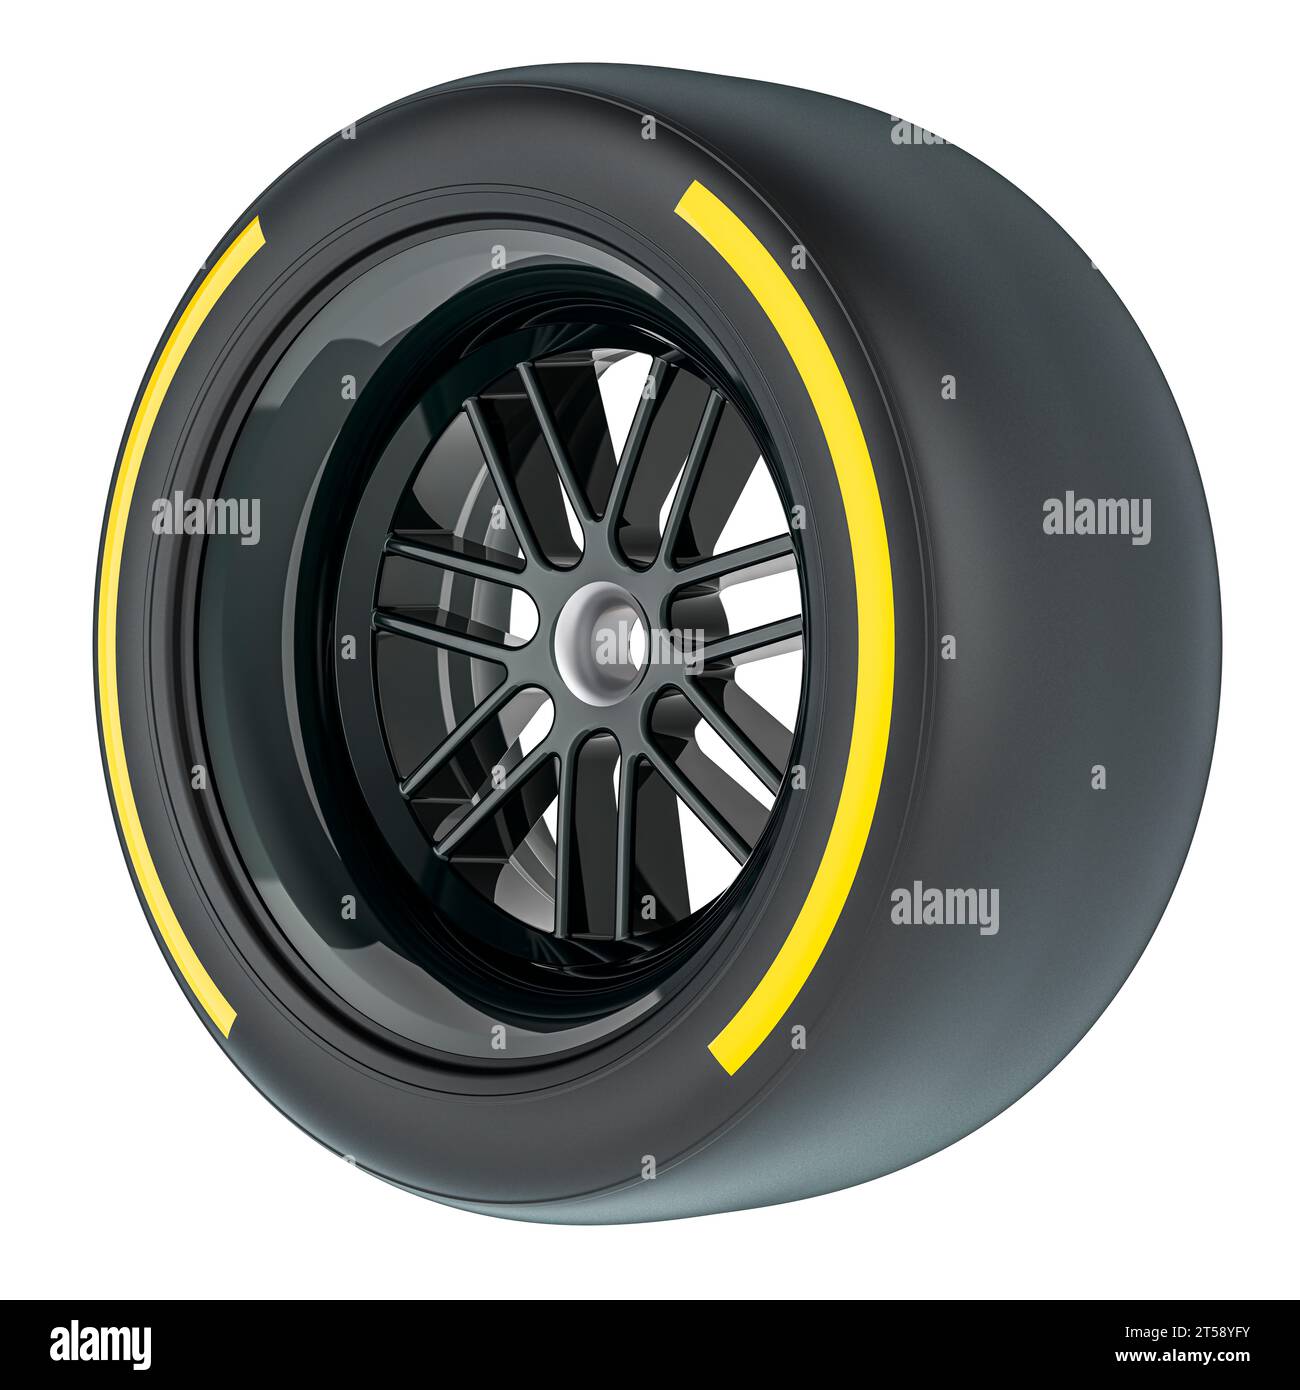 Racing Wheel with Yellow Medium, Compound type tyre, 3D rendering isolated on transparent background Stock Photo